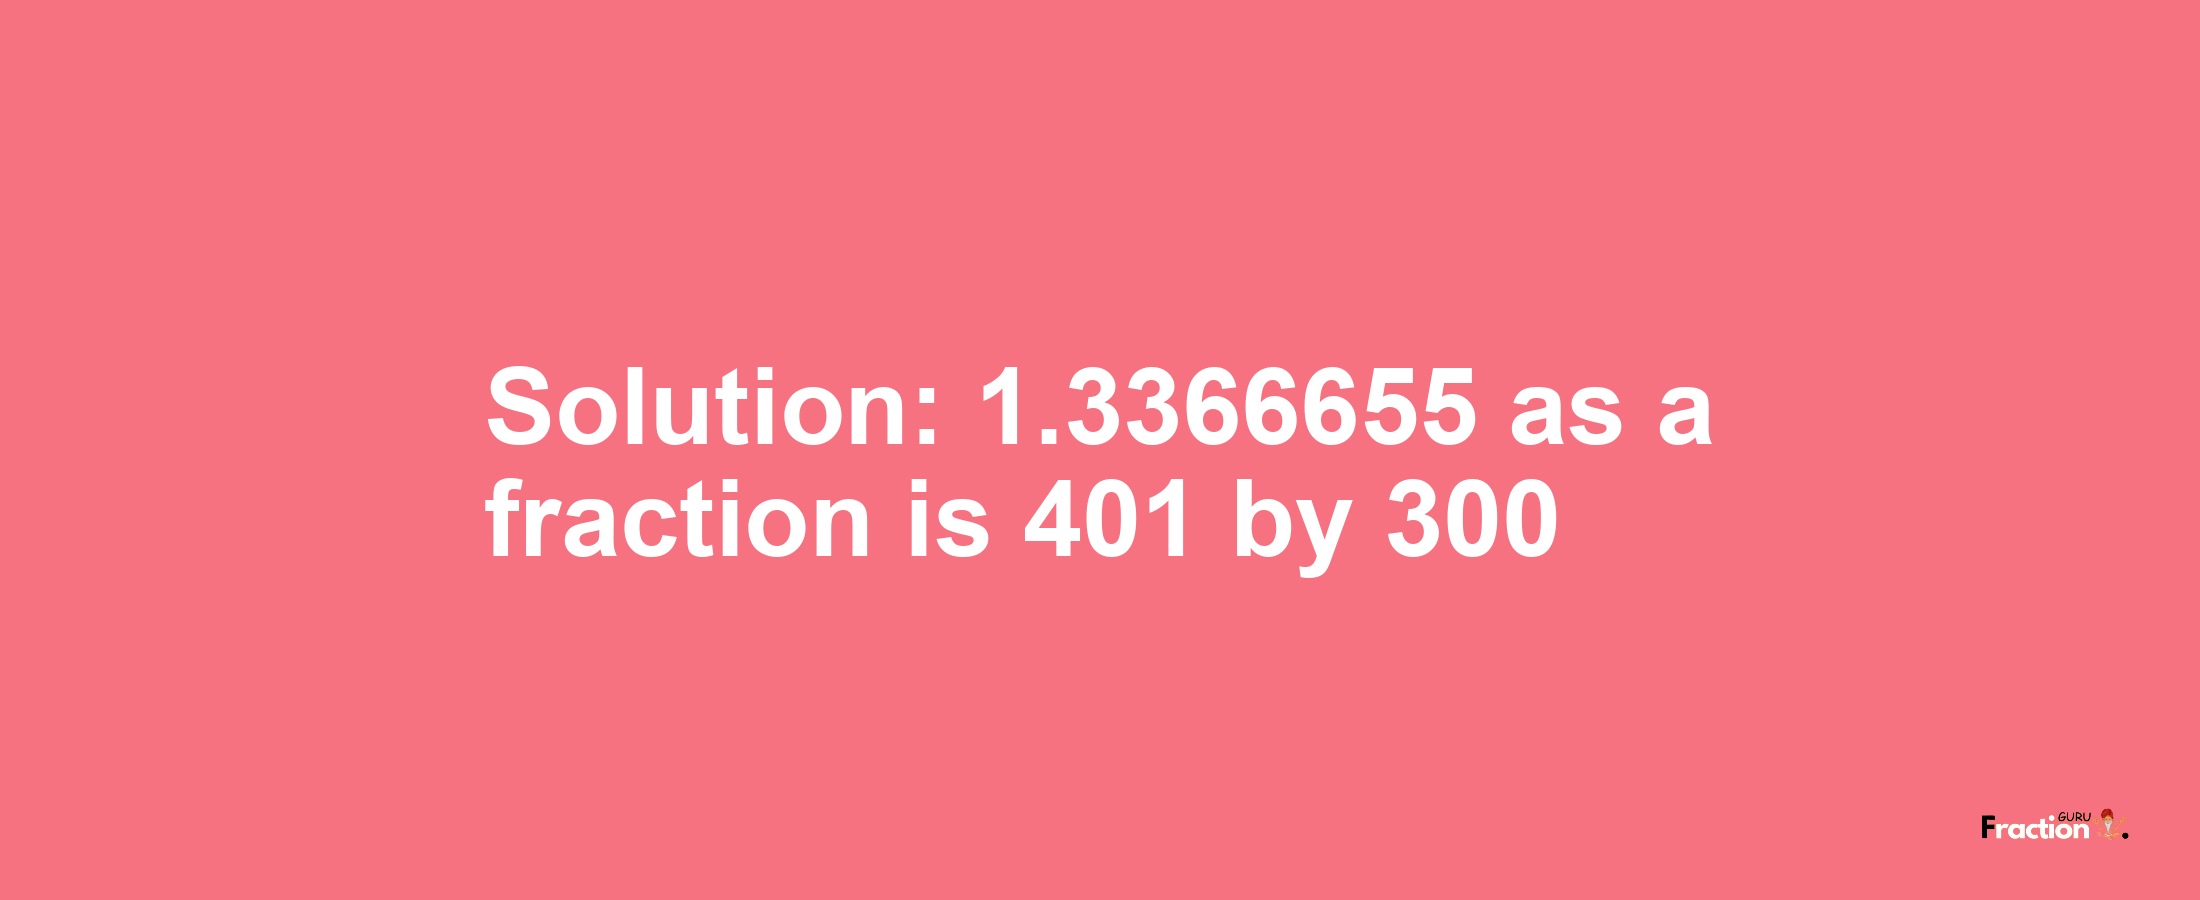 Solution:1.3366655 as a fraction is 401/300